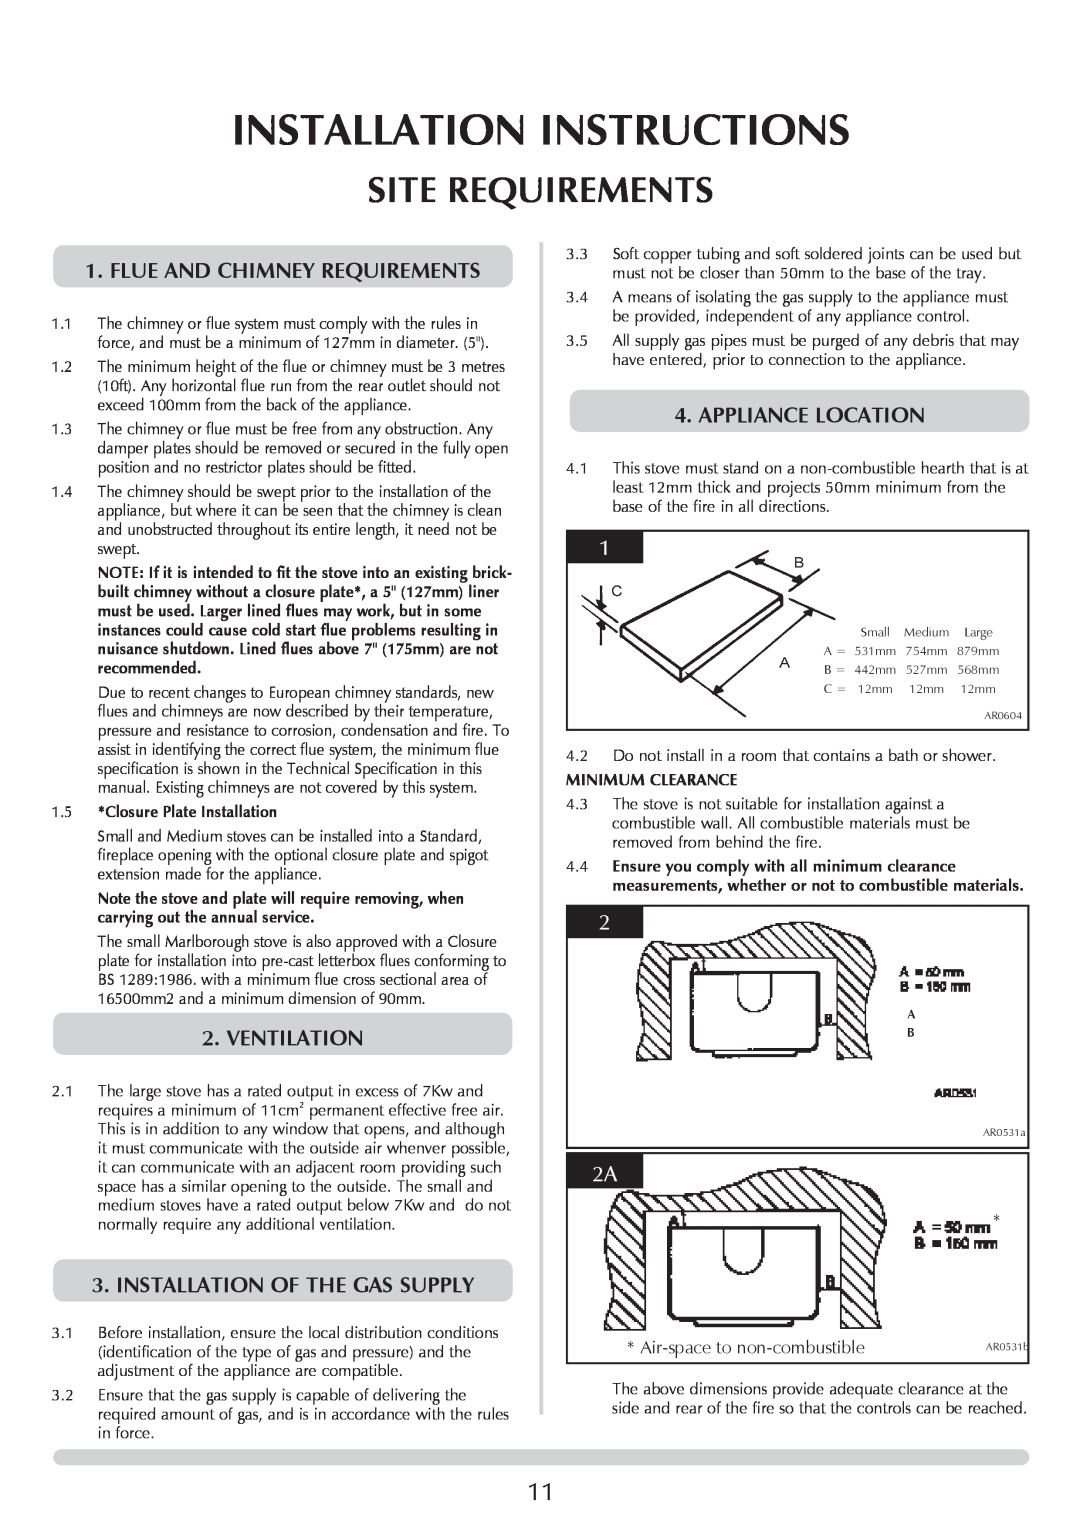 Stovax 8517-P8517, 8522-P852 manual Site Requirements, Installation Instructions, Flue And Chimney Requirements, Ventilation 